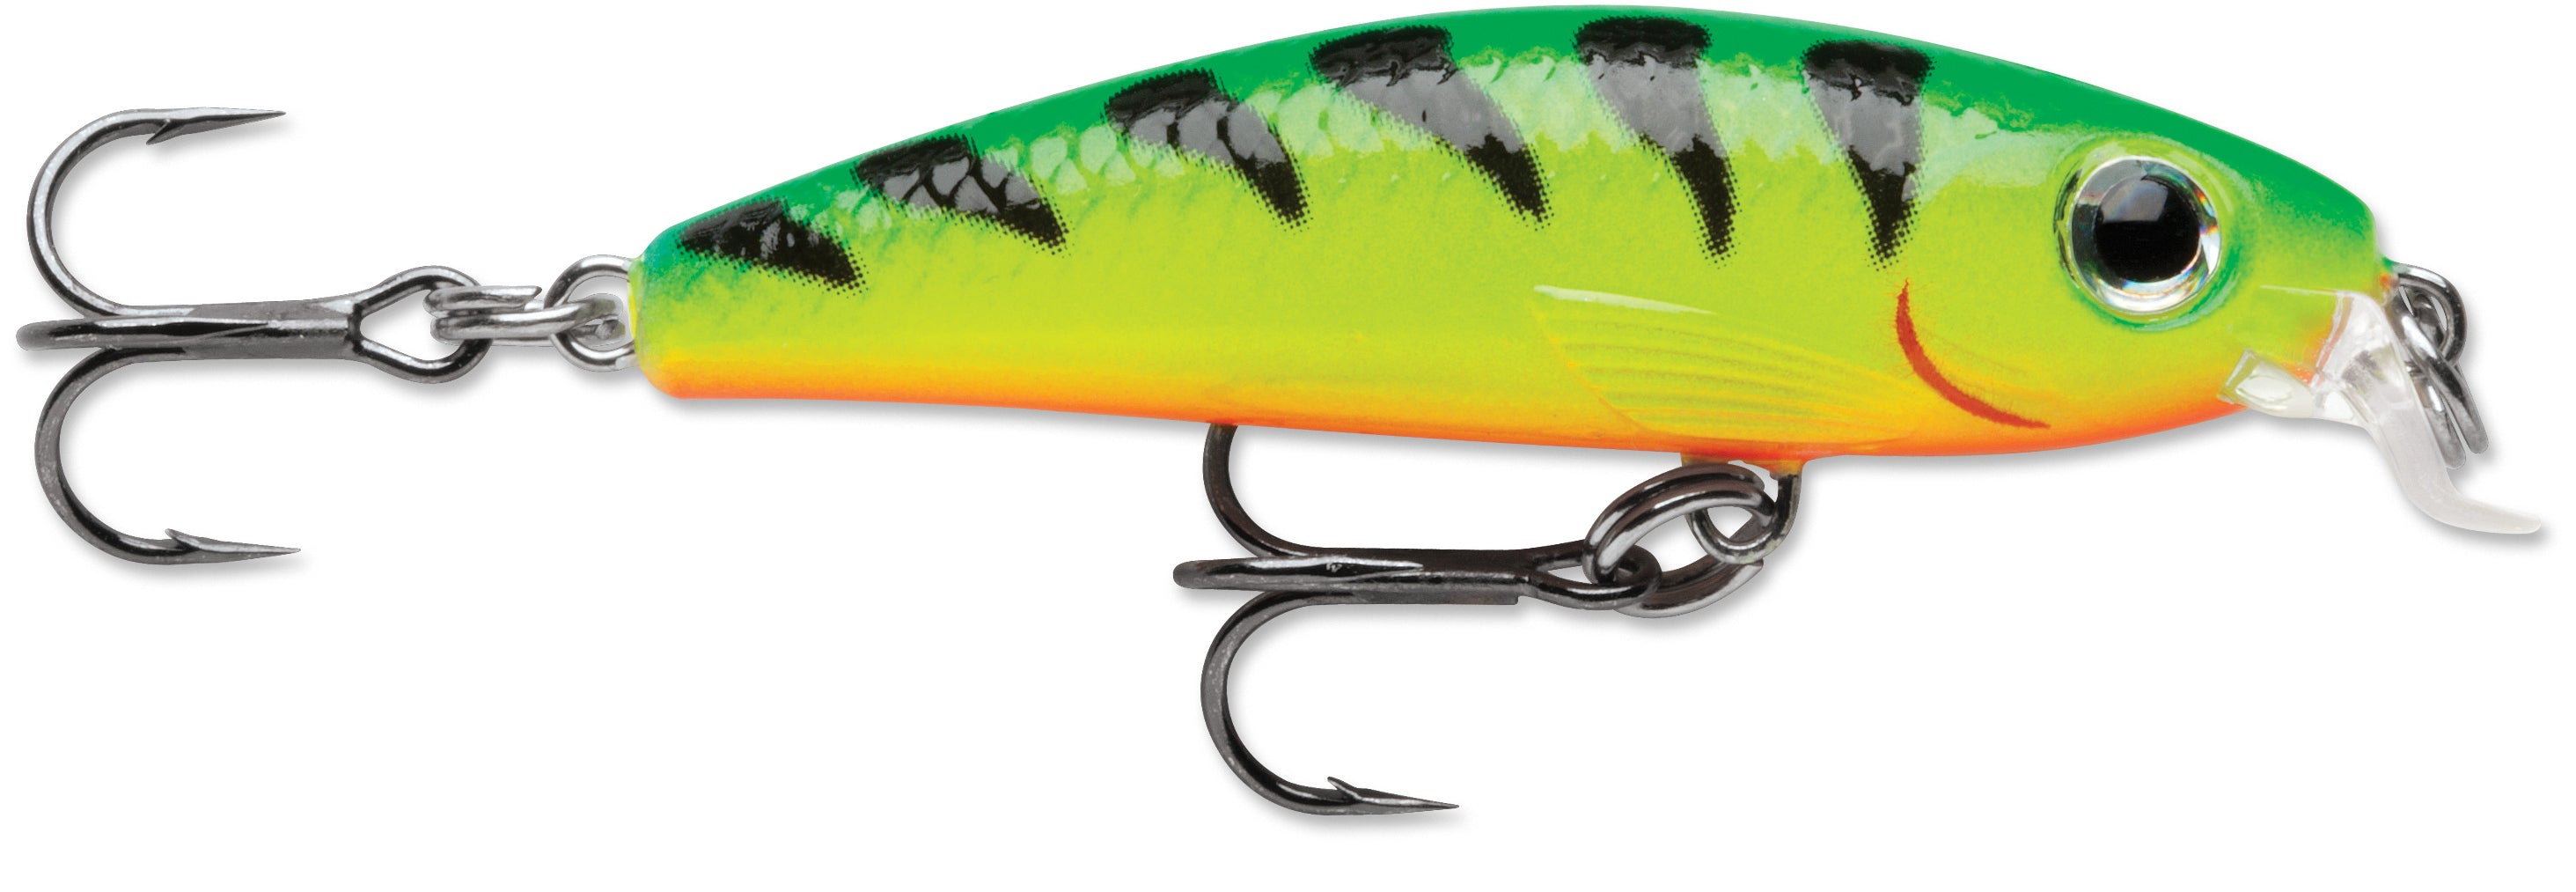 Kit Rapala Ultra Light Trout - Nootica - Water addicts, like you!